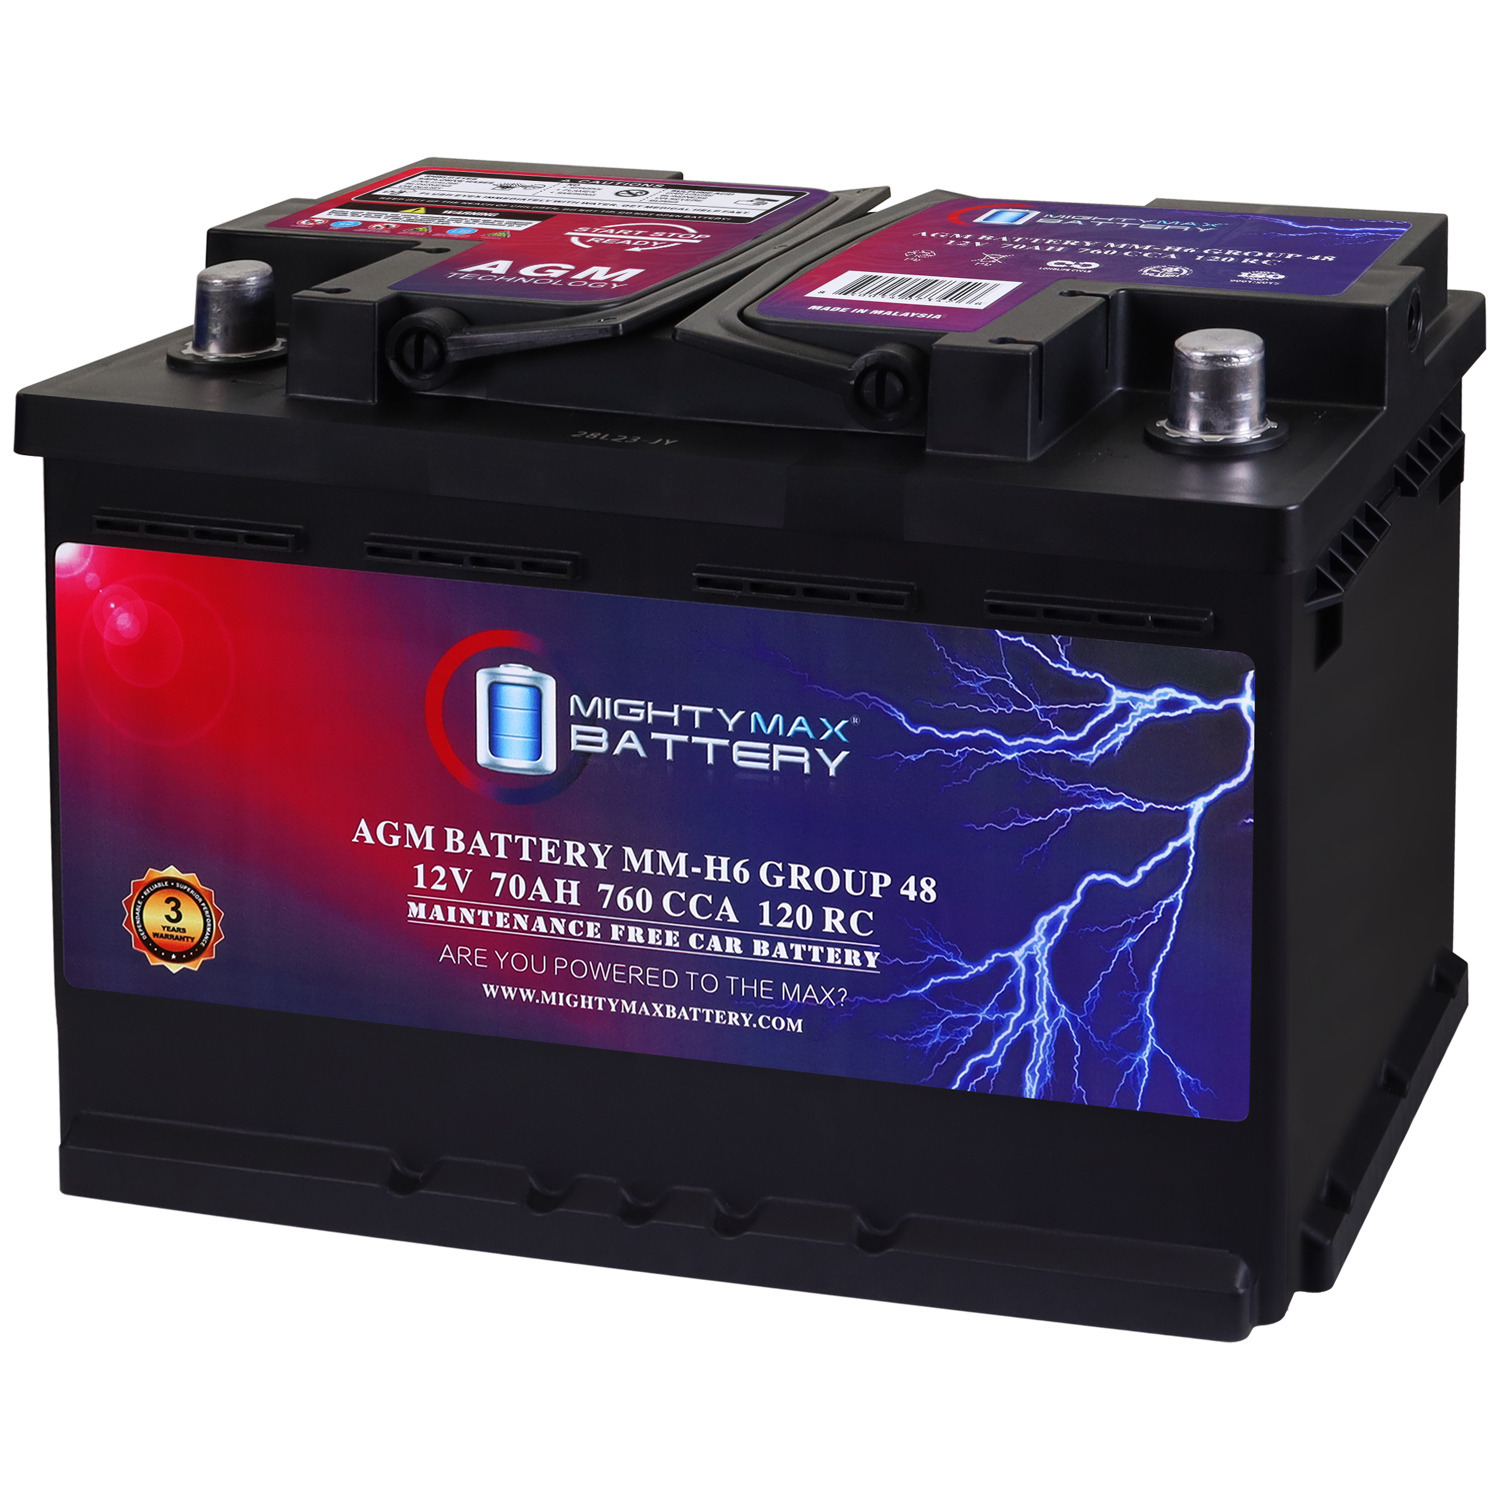 MM-H6 Group 48 12V 70AH 120RC 760CCA Replacement Battery Compatible with Volkswagen Tiguan Limited 18